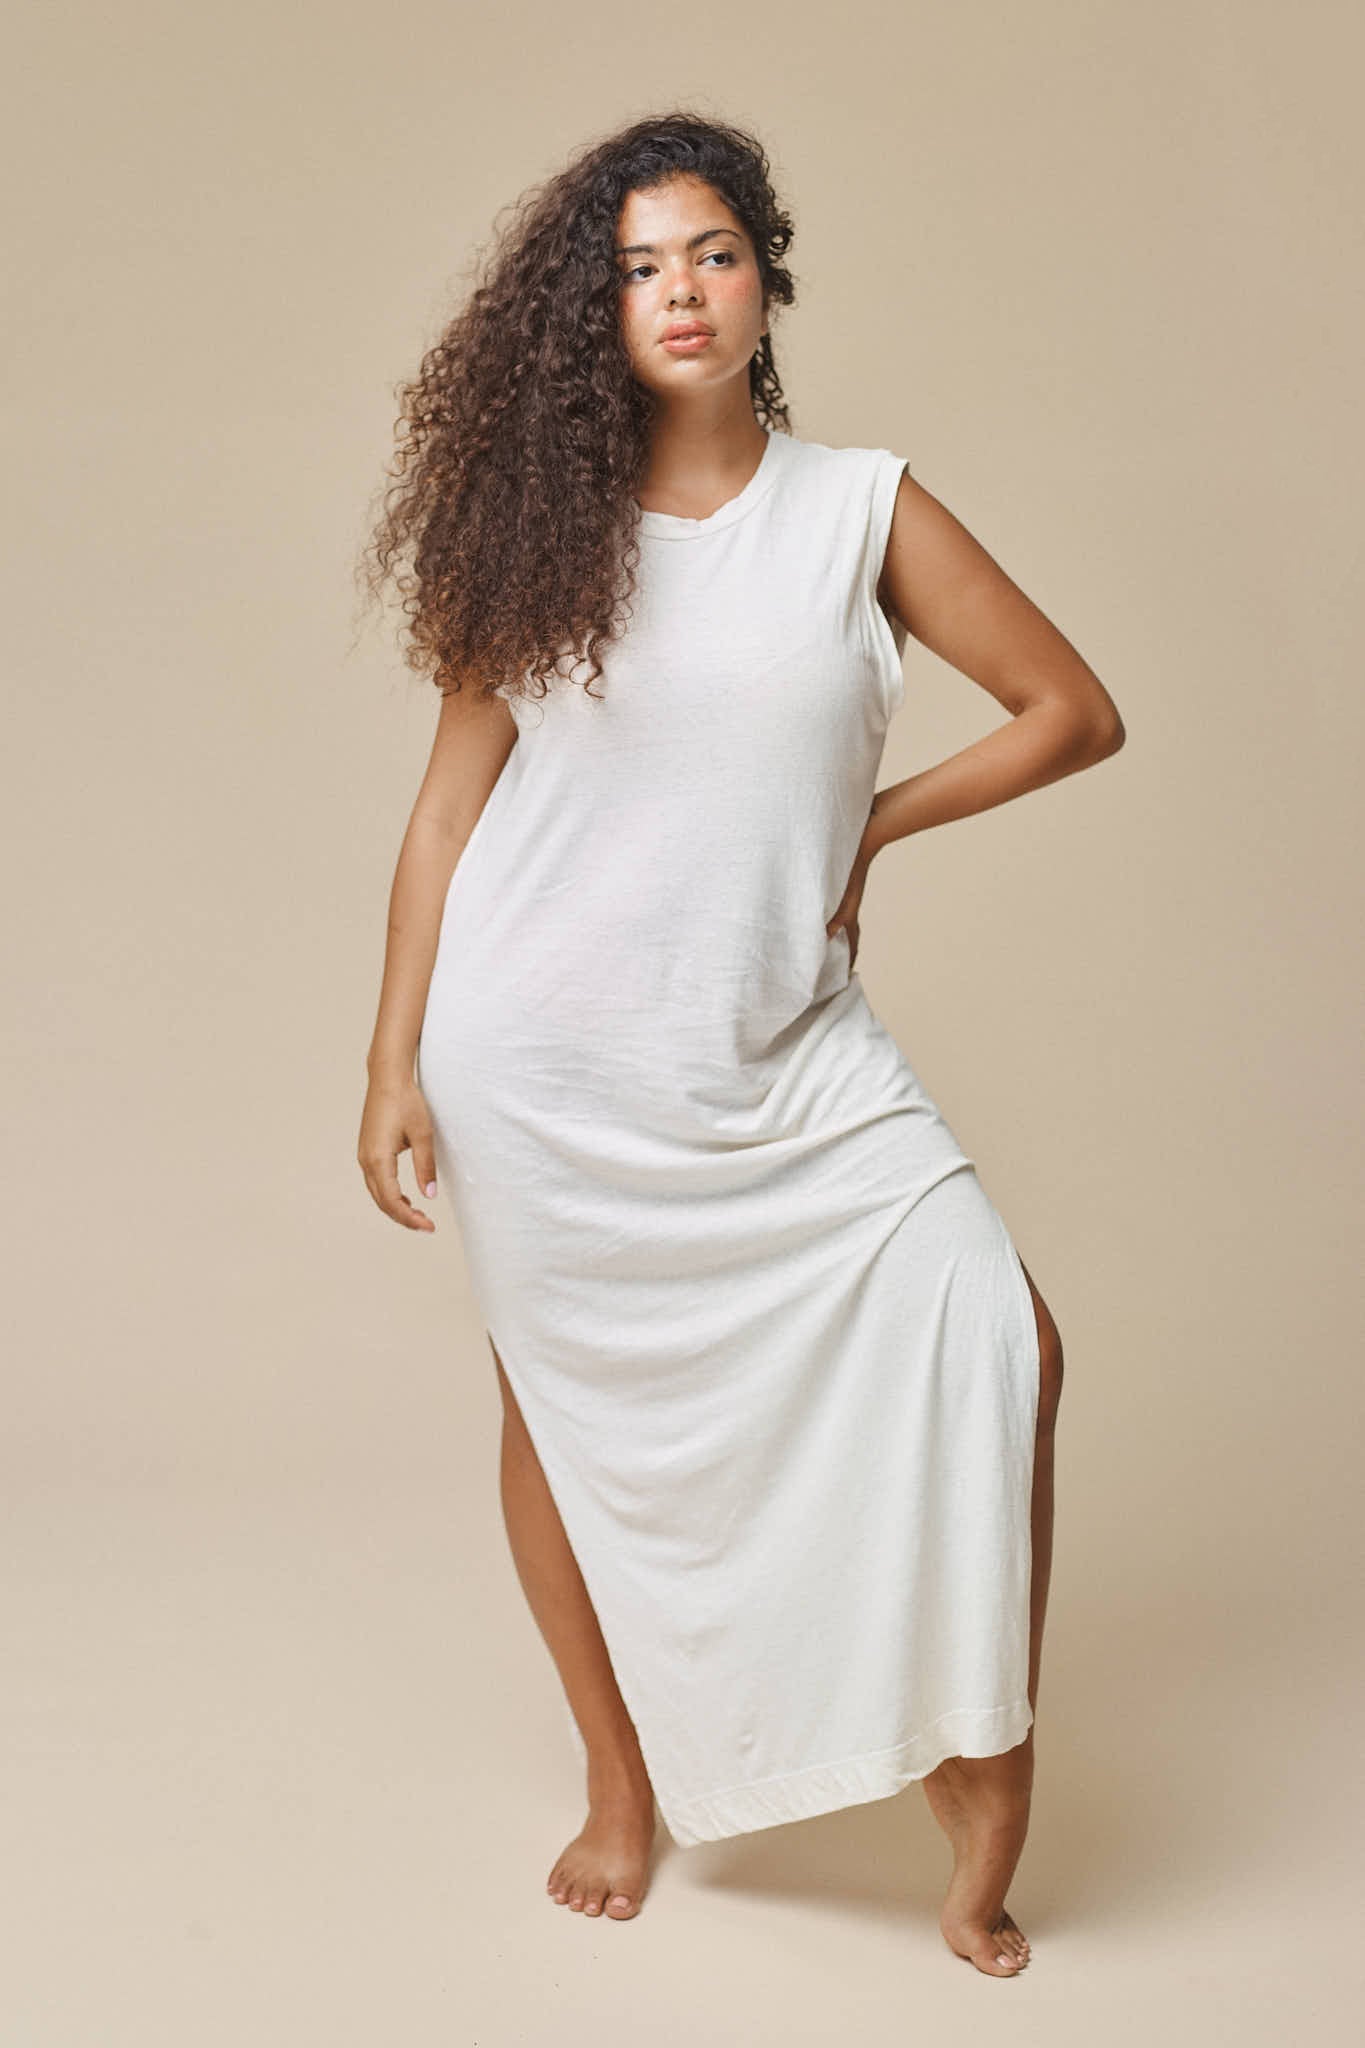 jungmaven hermosa dress - Made with a soft + breezy lightweight hemp blend, with bra-friendly straps and a side slit for easy movement. The relaxed shape is both flattering and laid back, dress it up with a jacket and boots or pair with flats for a casual cool look.